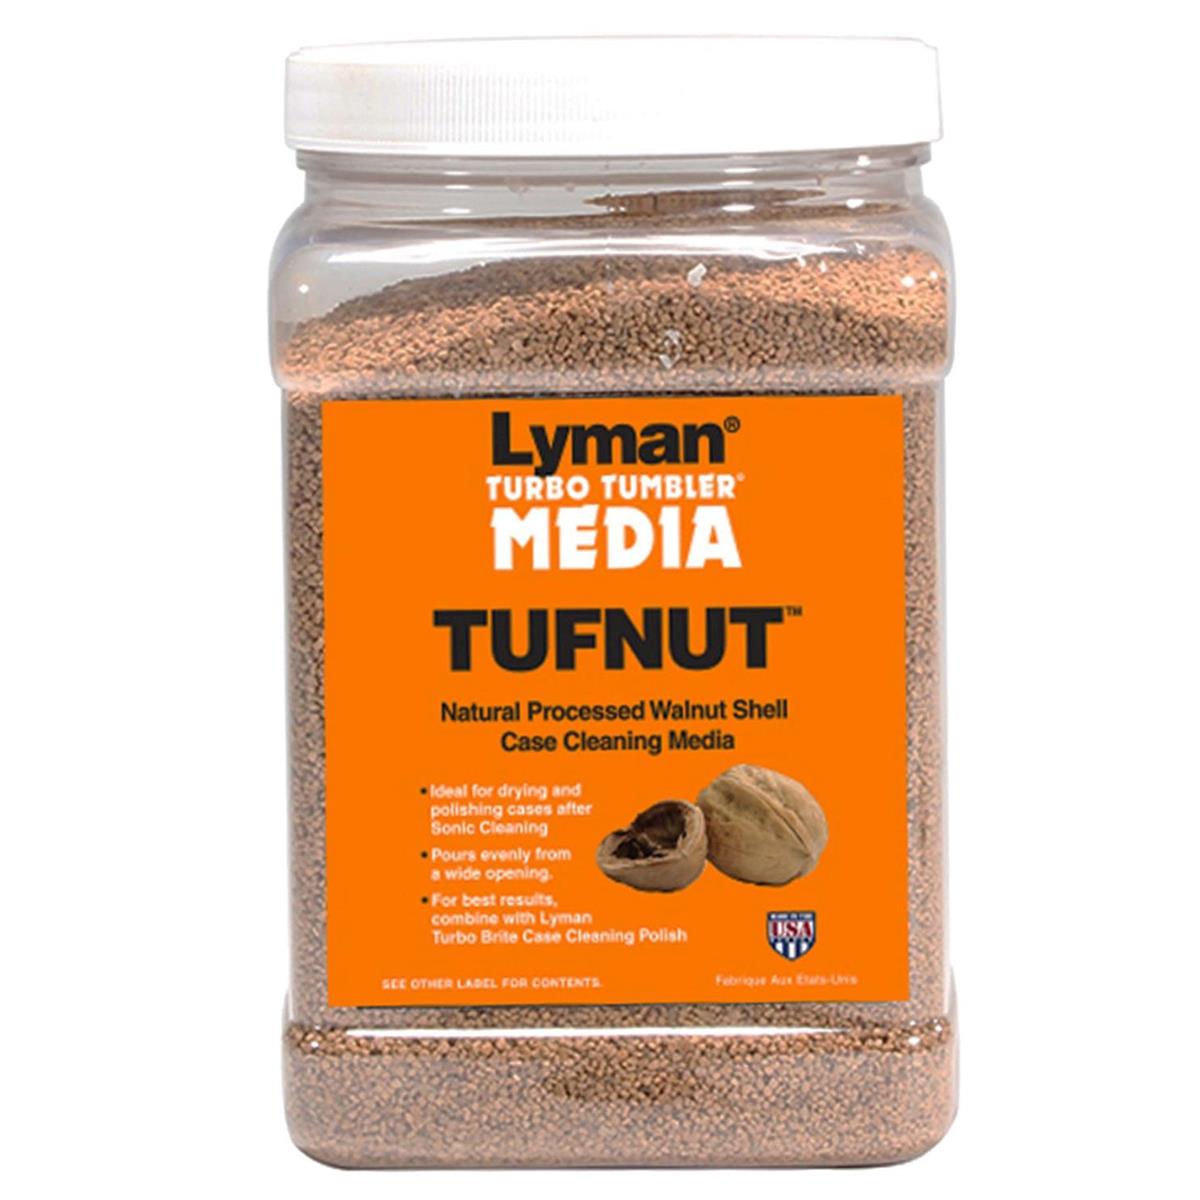 Image of Lyman Small Tufnut Untreated Tumbling and Cleaning Brass Case Media